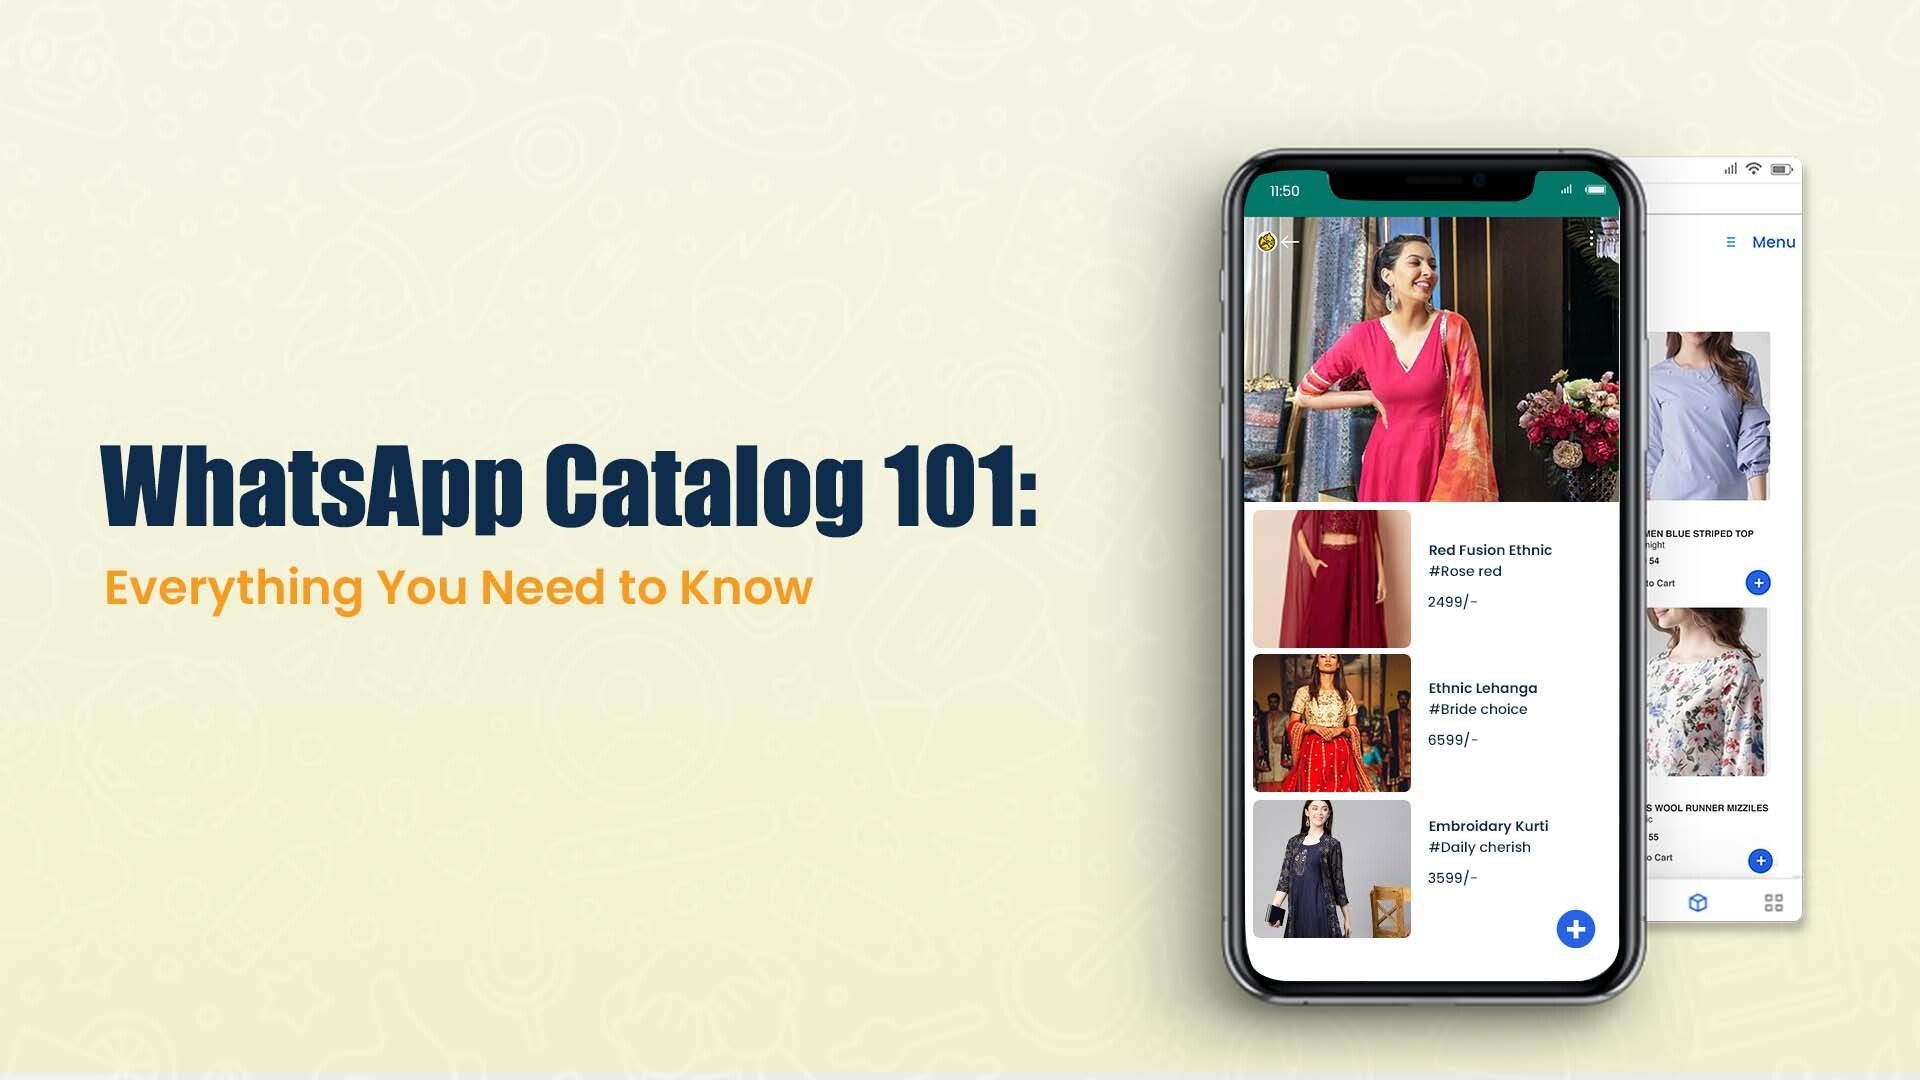 WhatsApp Catalog 101: Everything you need to know